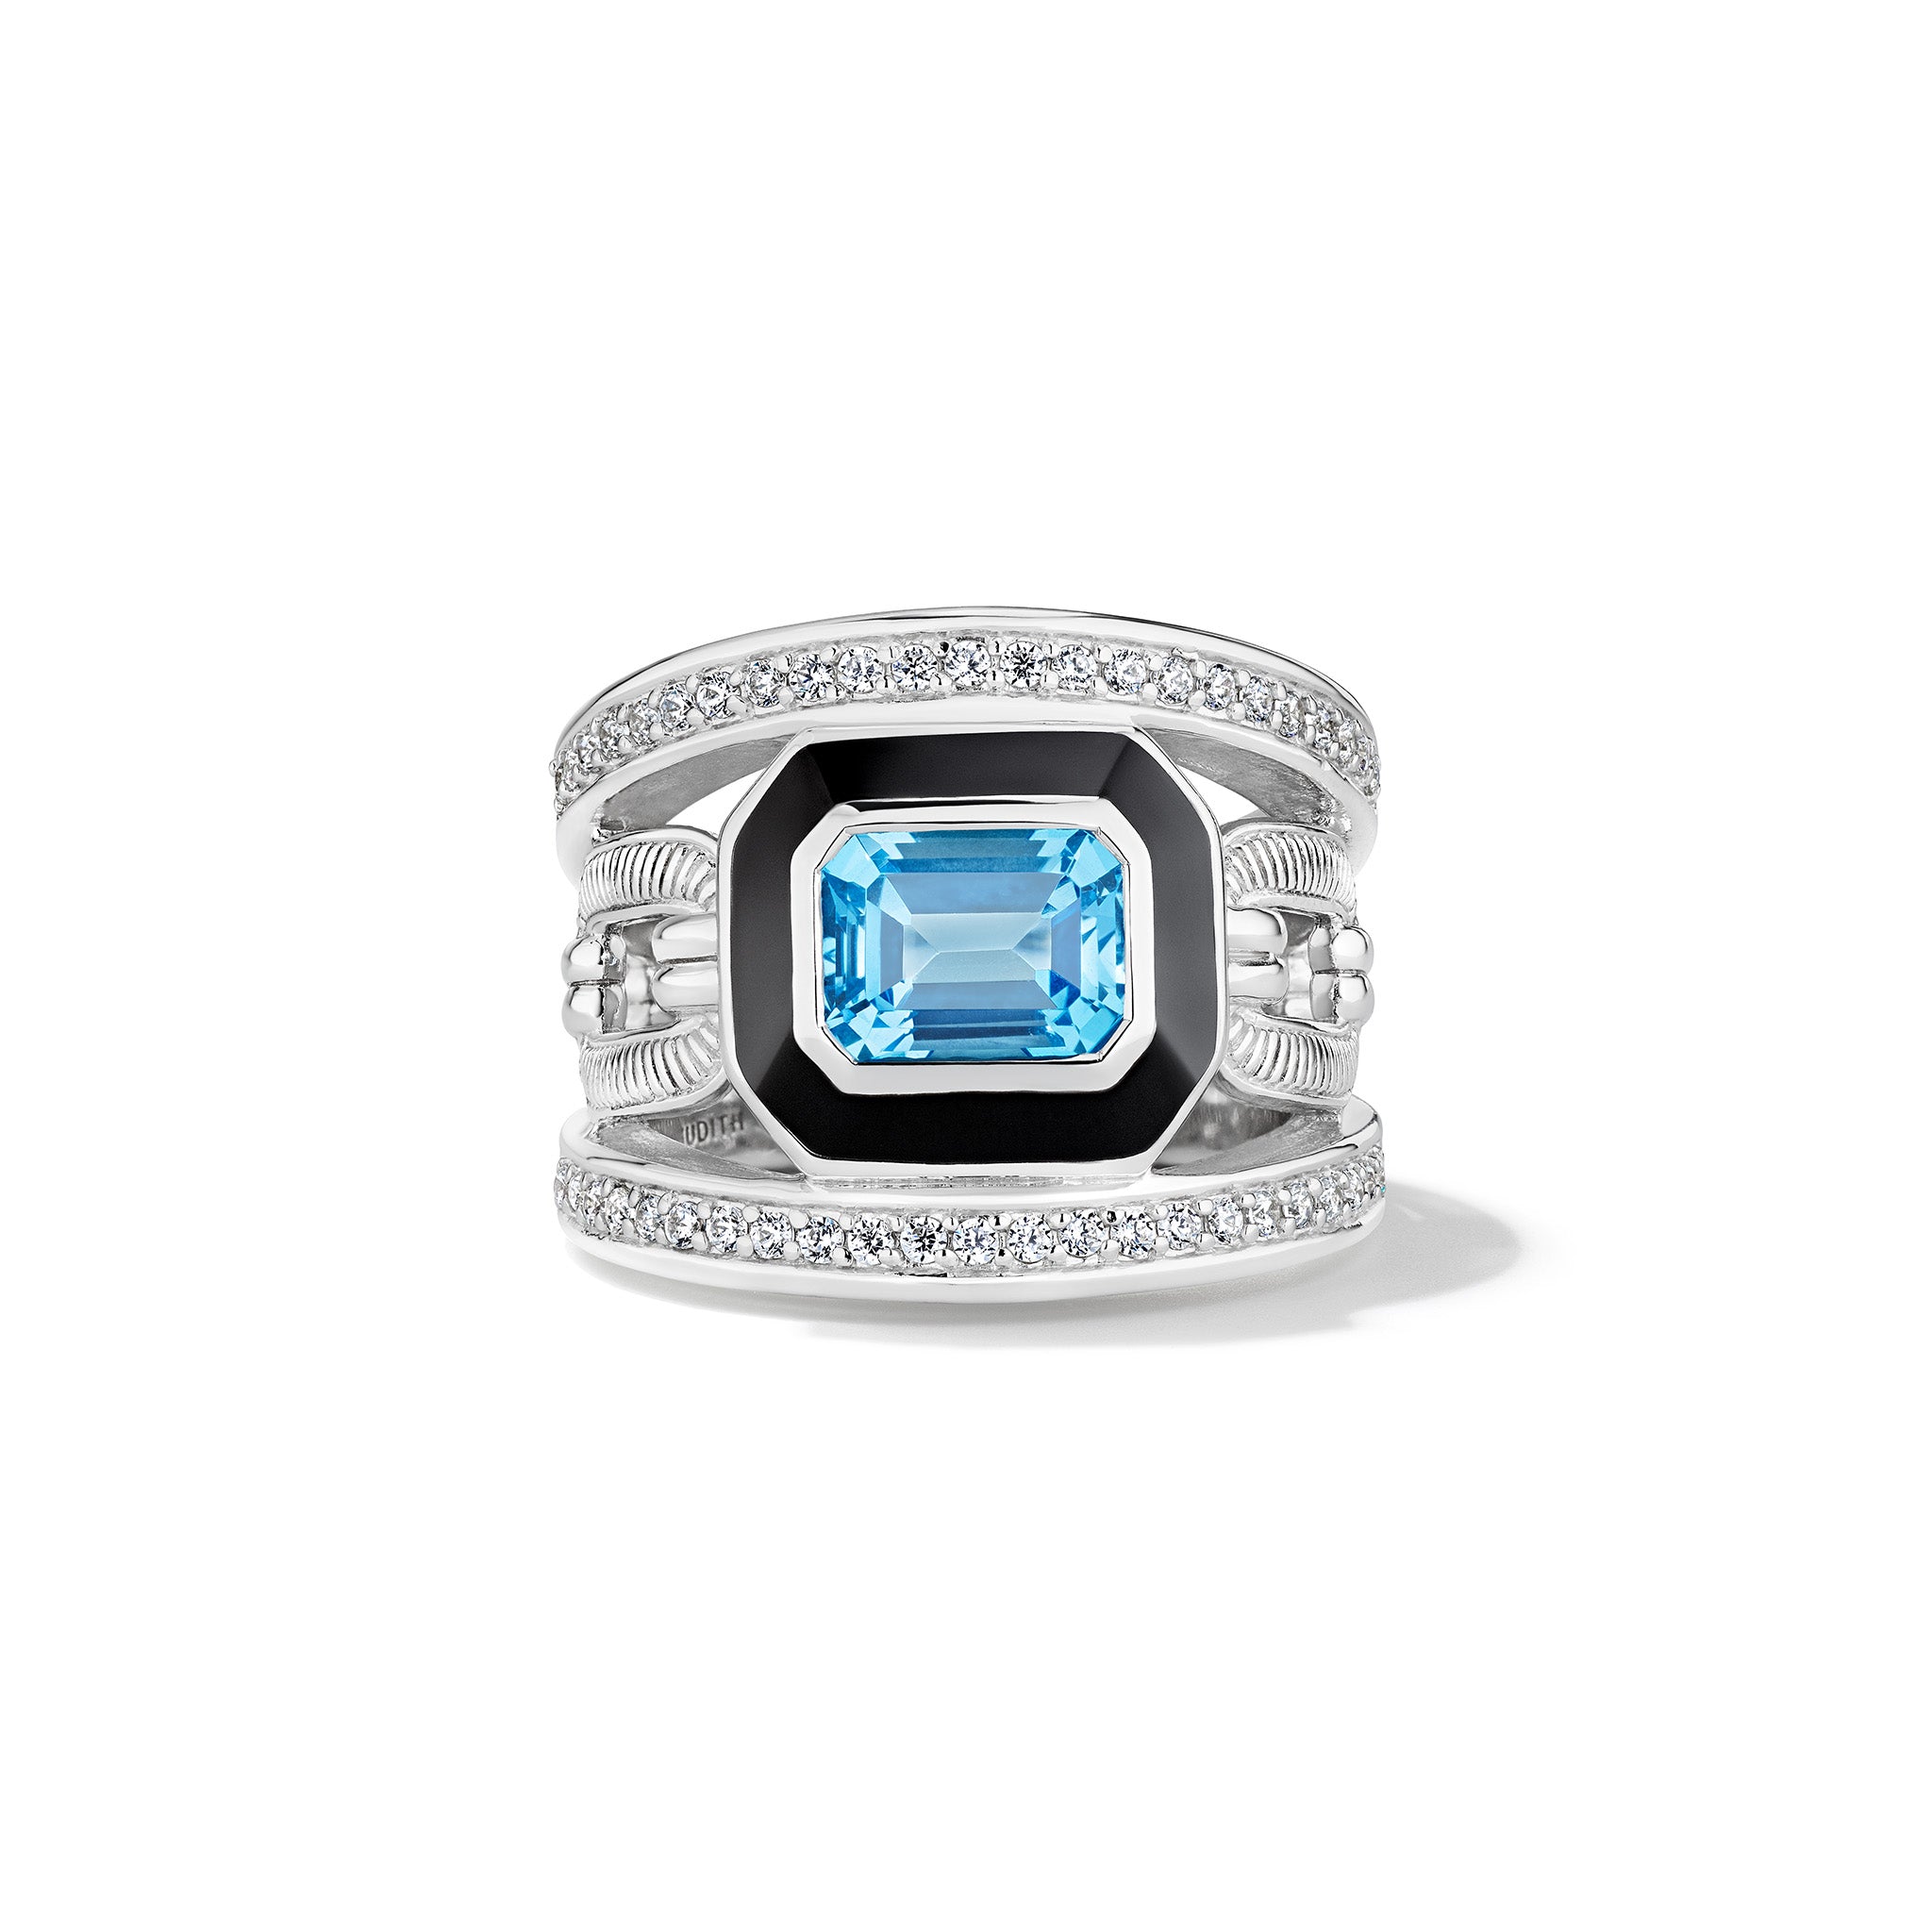 Adrienne Band Ring With Enamel, Swiss Blue Topaz And Diamonds